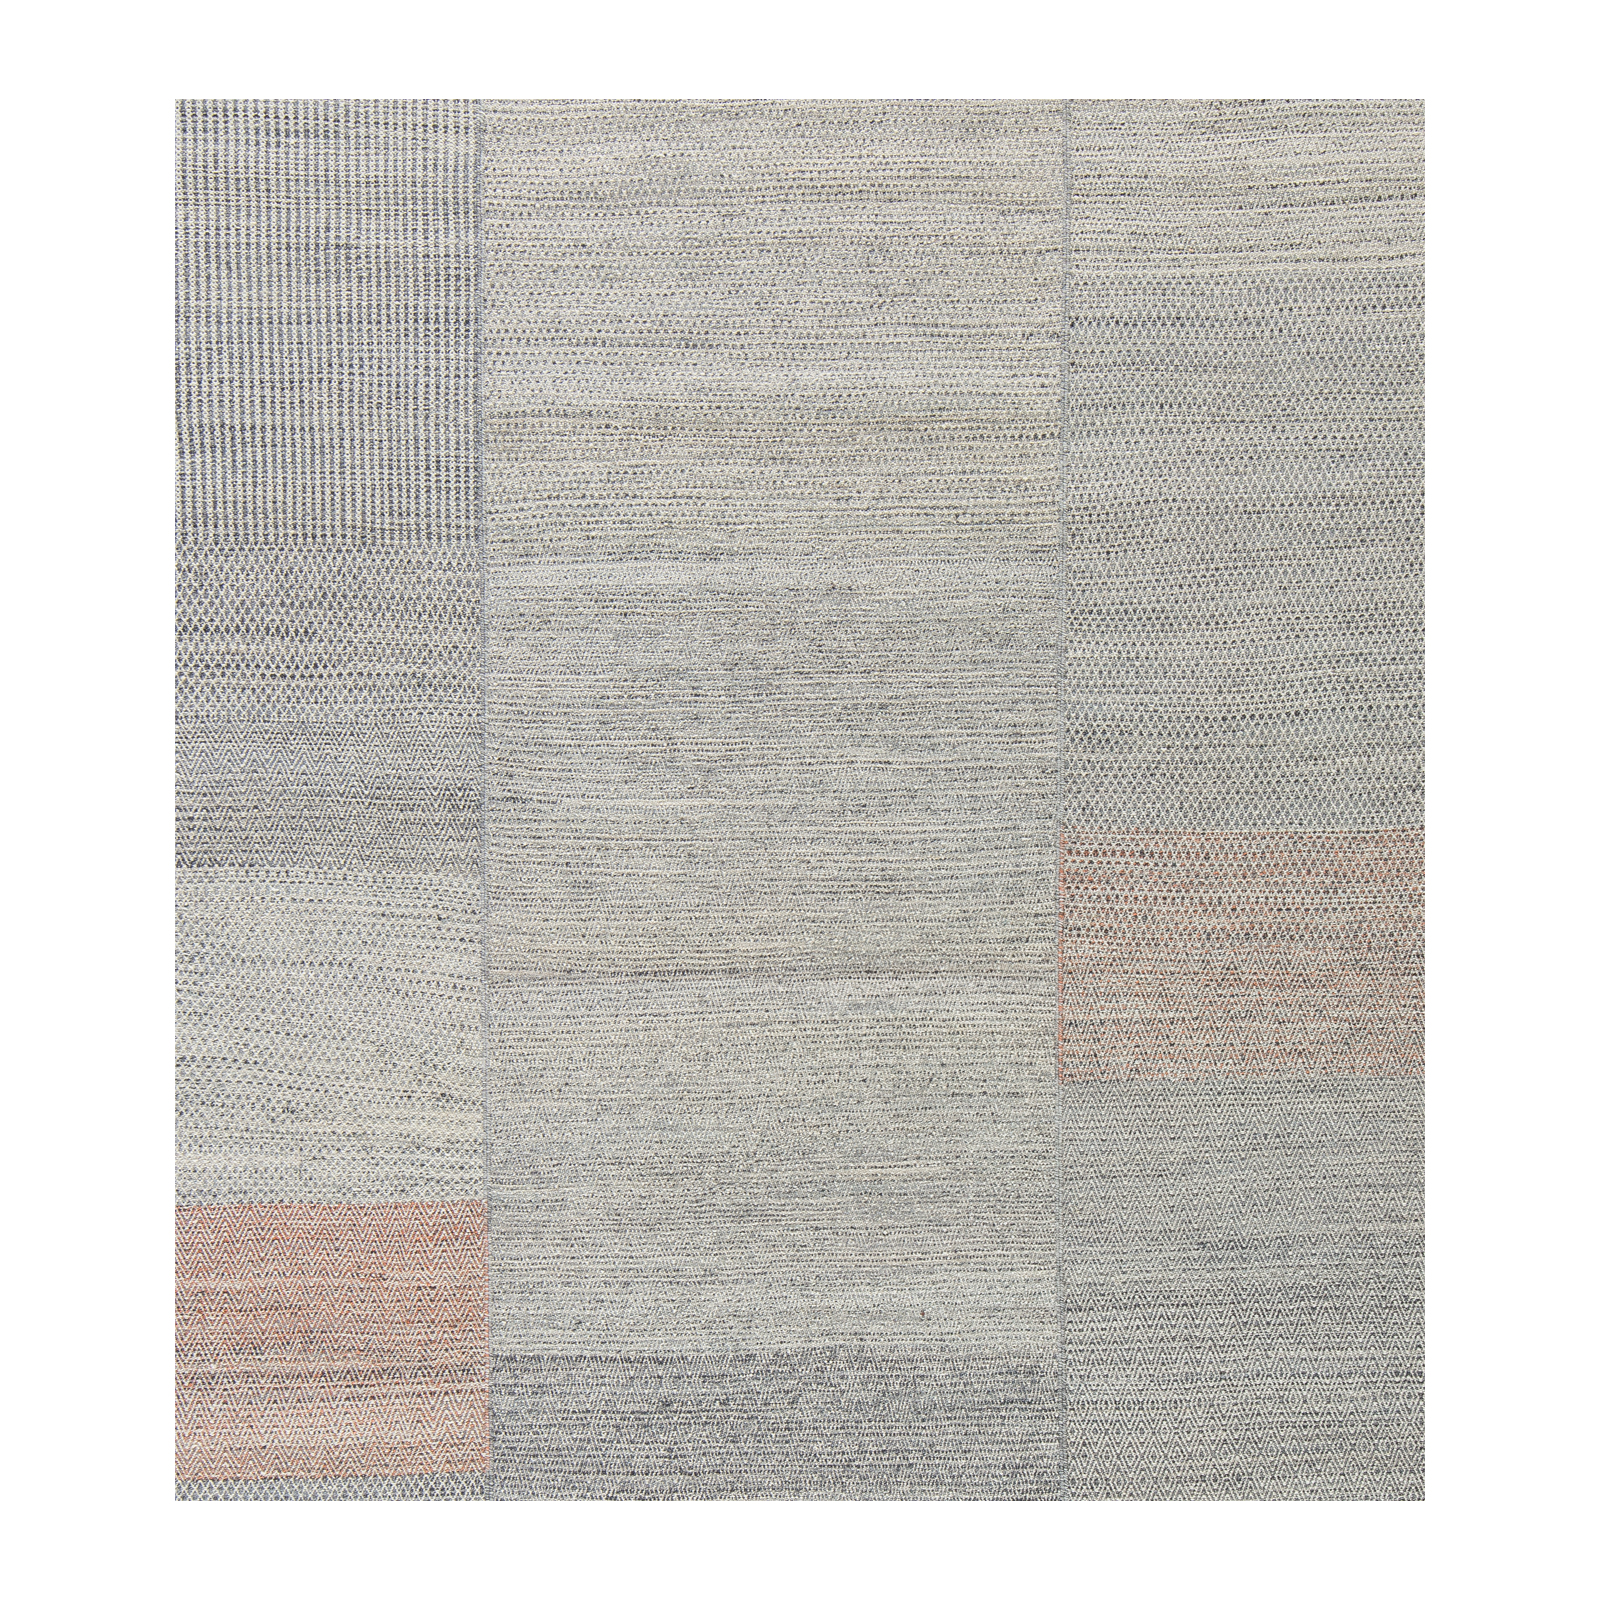 Our Mazandaran Kiasar highlights the minimalist sophistication that existed long before the modern era. And its made of handspun wool and all natural dye.